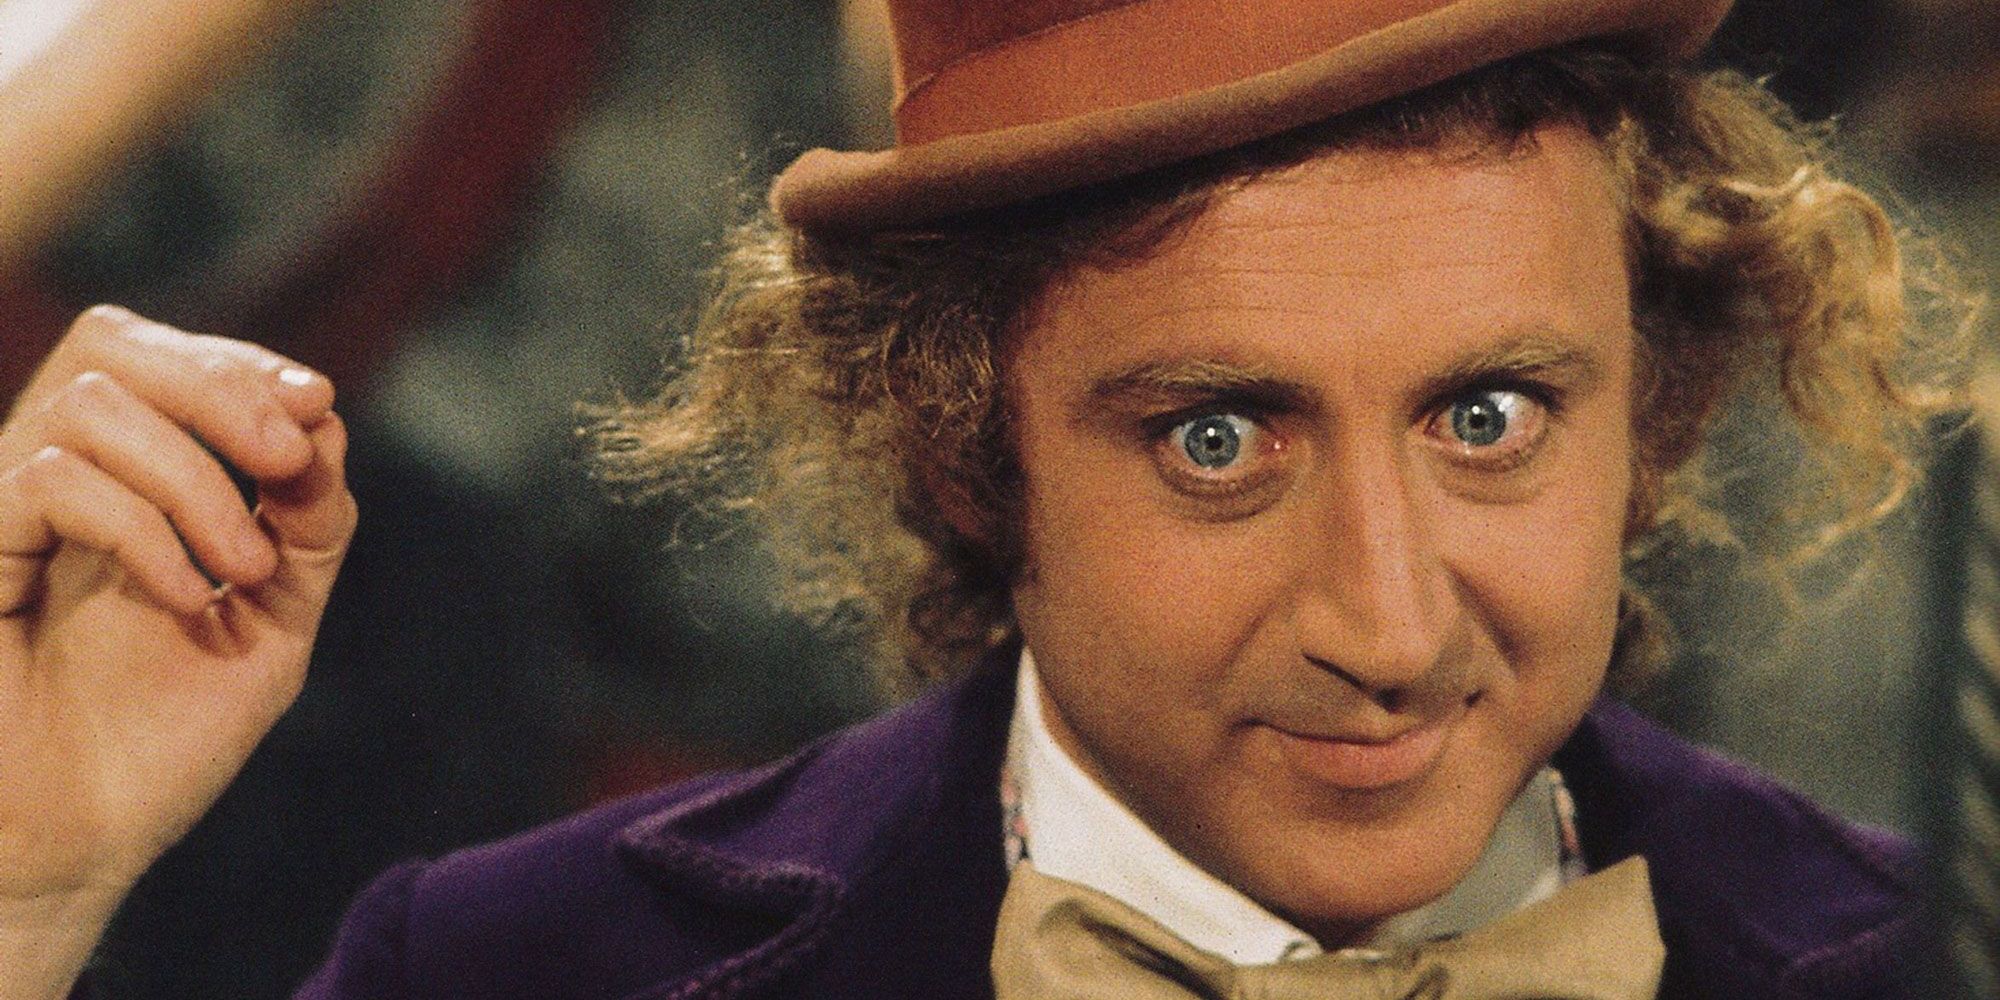 Willy Wonka with a creepy wide-eyed look in Willy Wonka and the Chocolate Factory